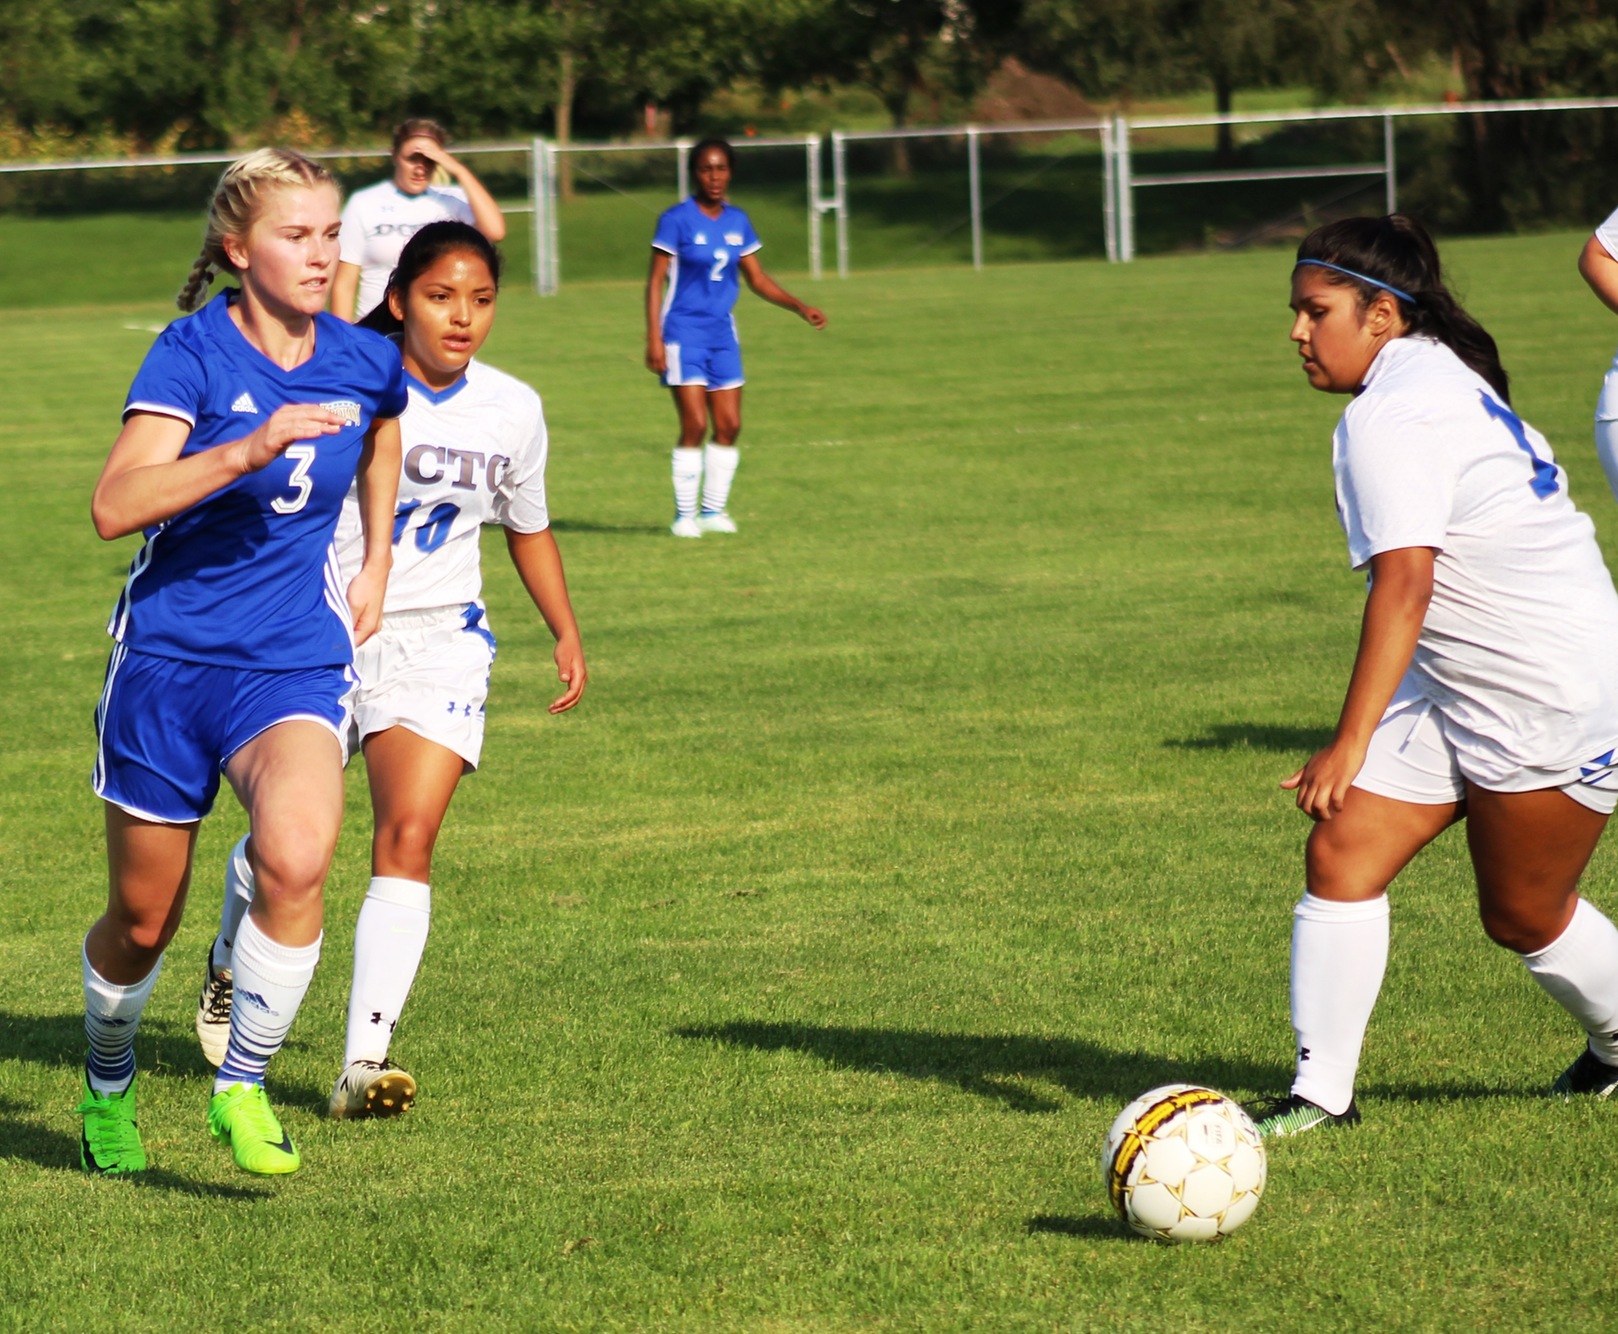 NIACC's Kirrilly Hughes chases after the ball in a match against DCTC.